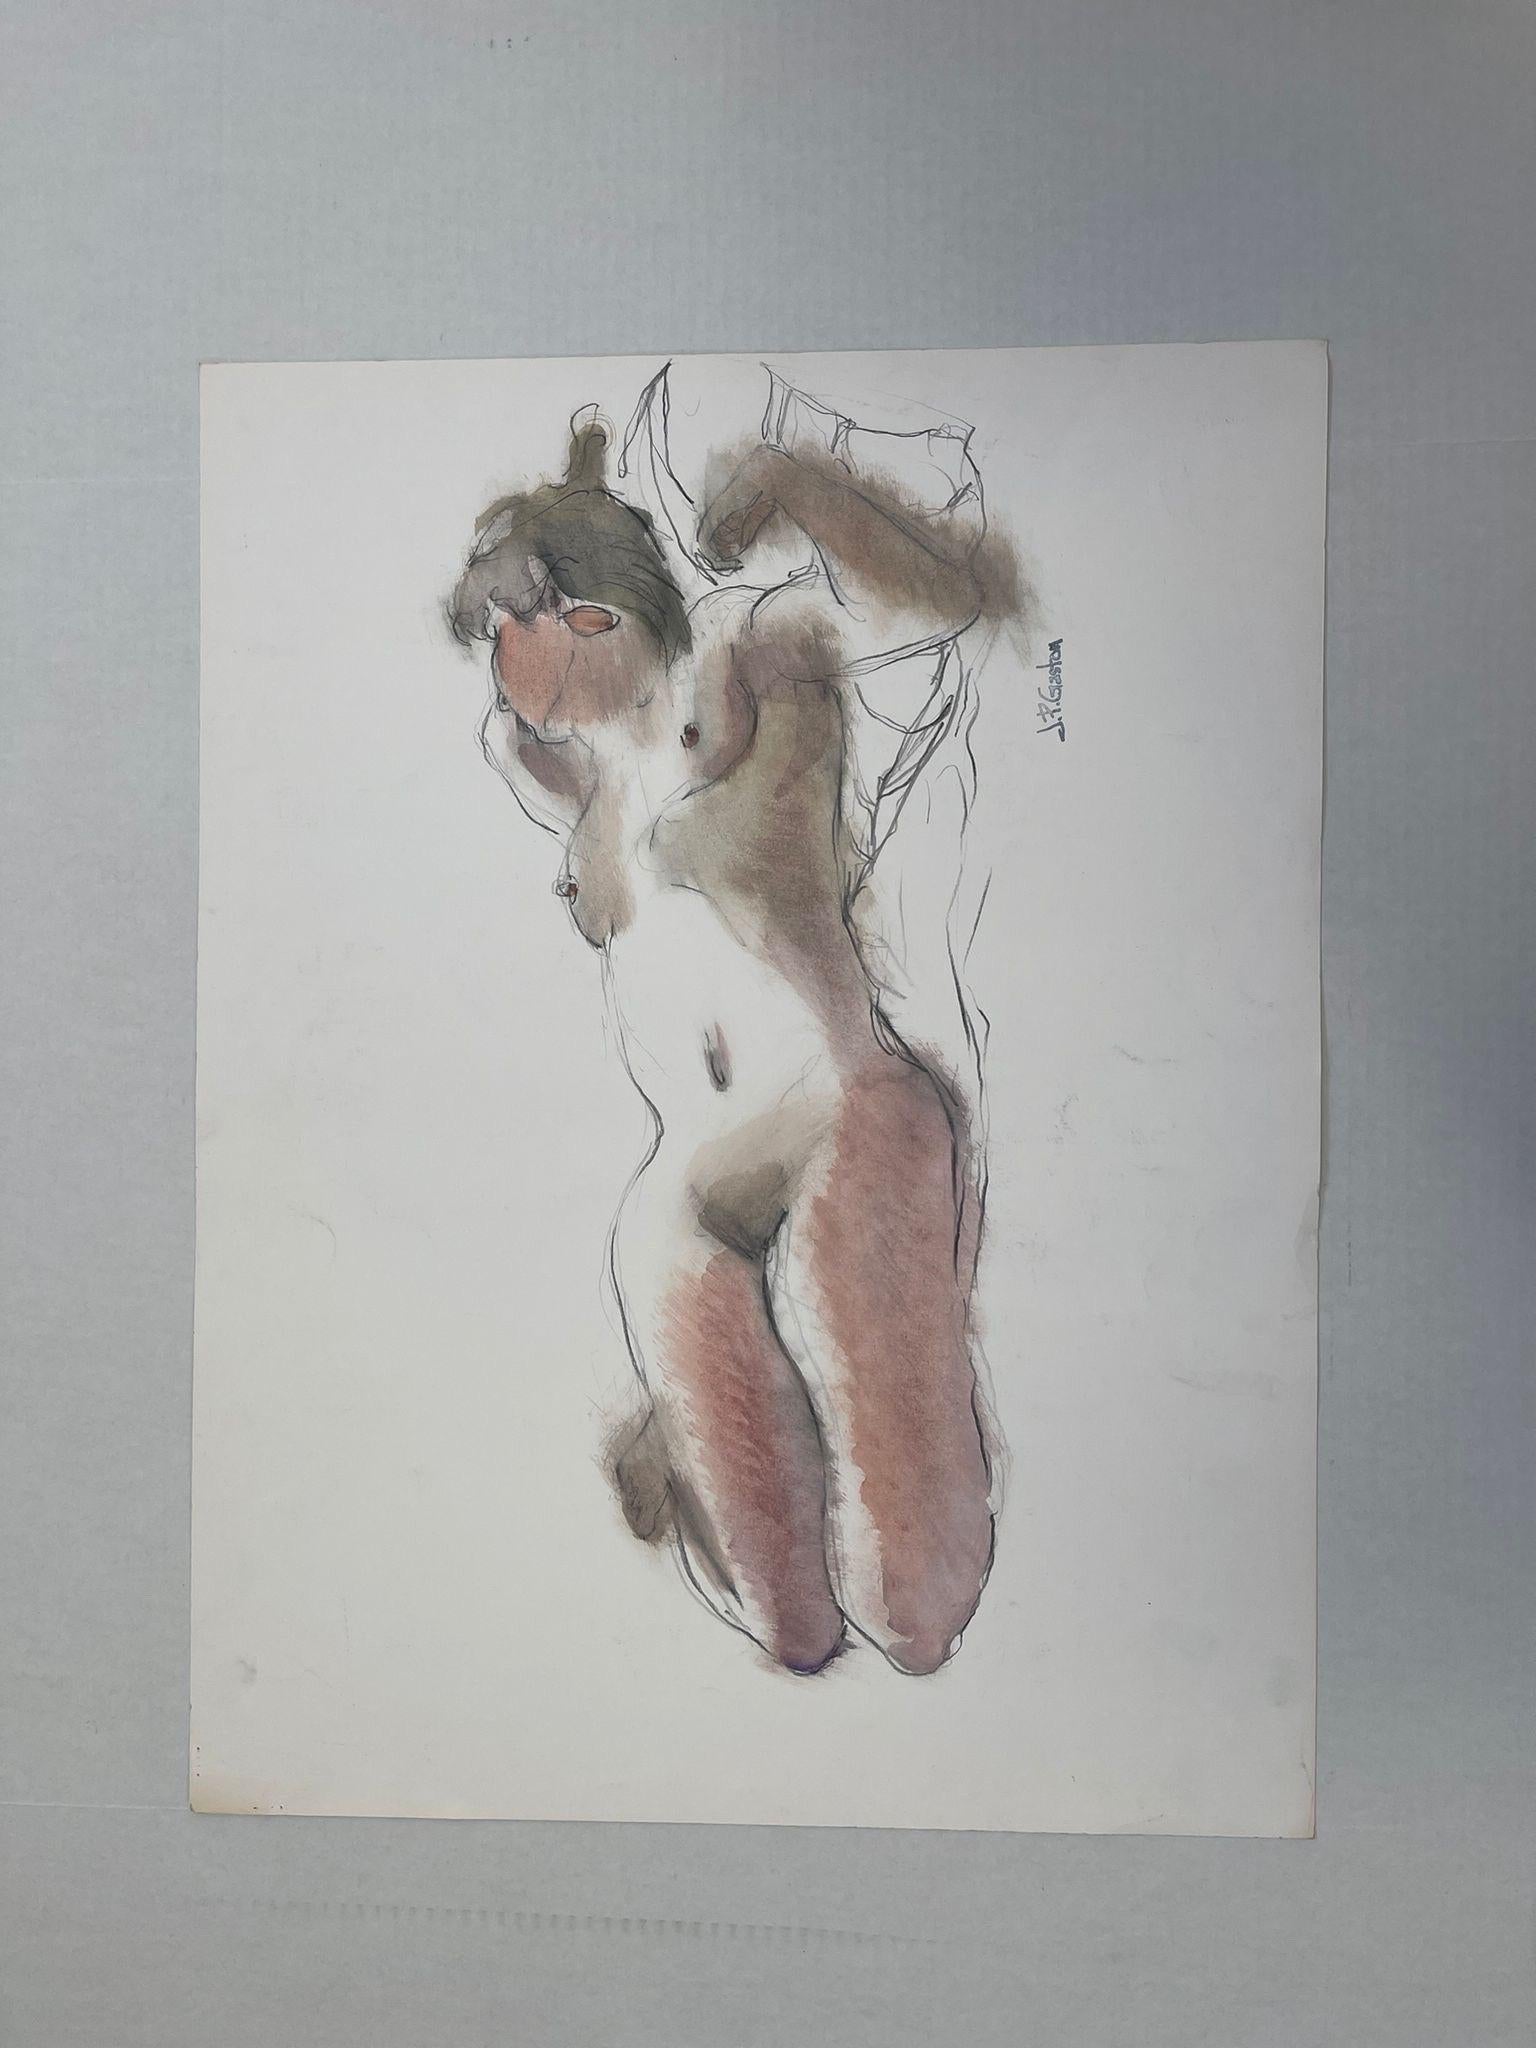 Nude Portrait of a Woman. Appears to be Pastel or Watercolor on paper. Signed UP Gaston as Pictured. Wear and Condition Consistent with Age.

Dimensions. 26 W ; 20 H